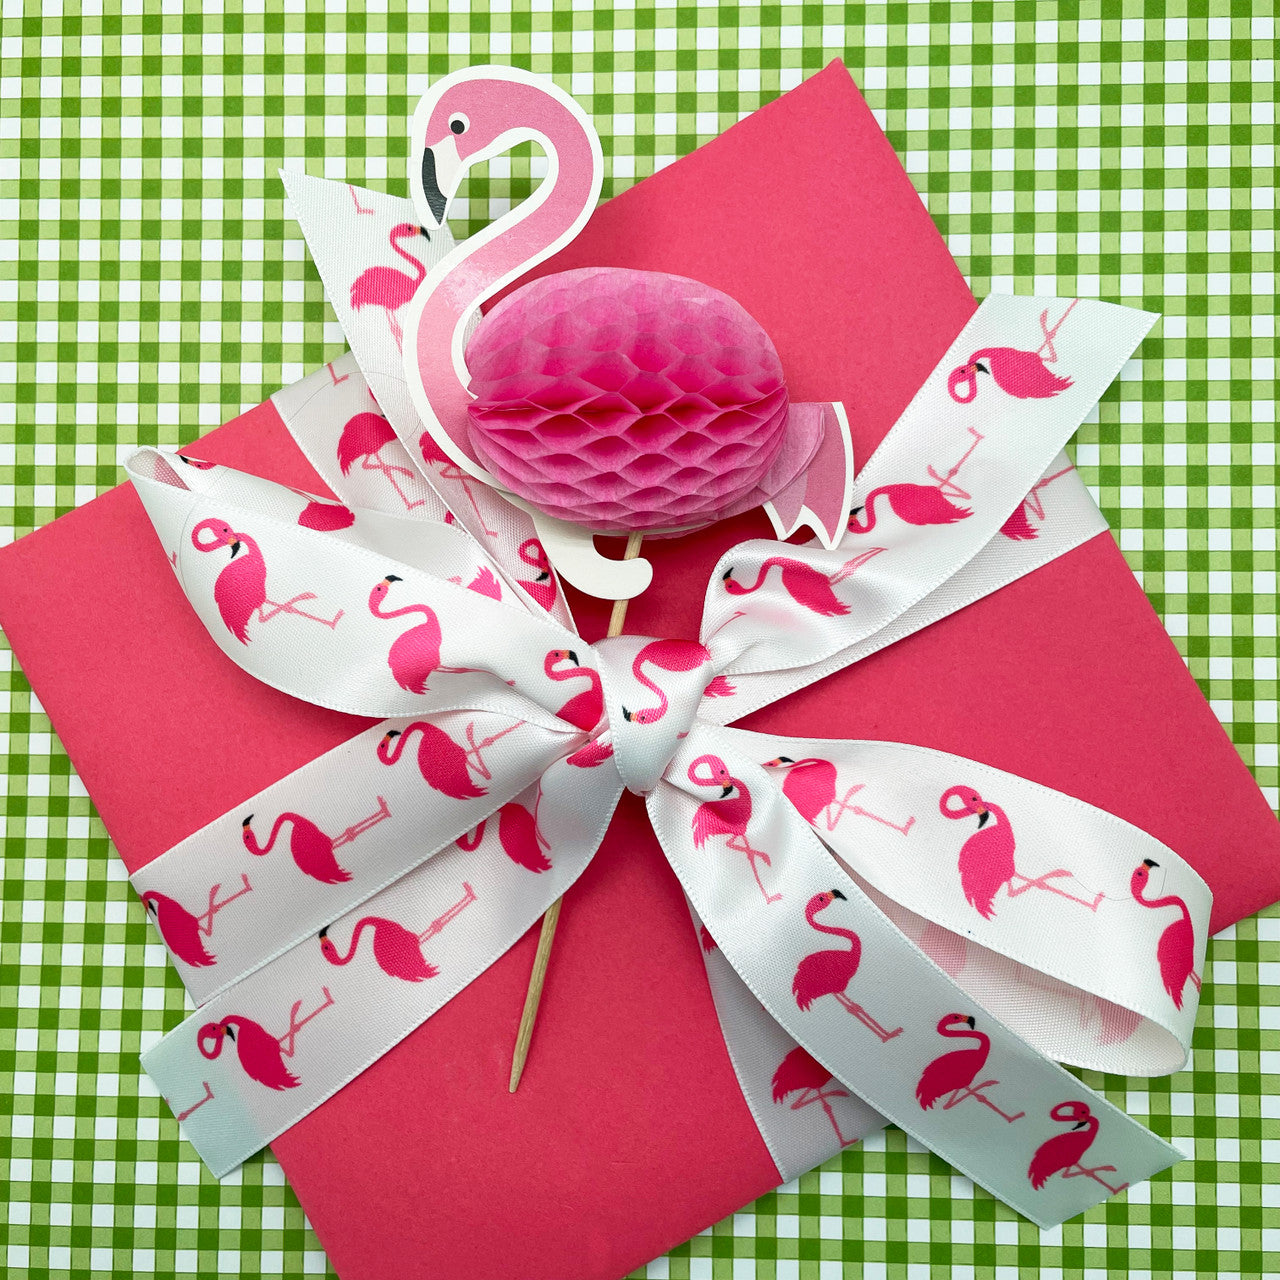 Pink flamingos tied on a pretty pink box are ready for gift wrap or party favors!